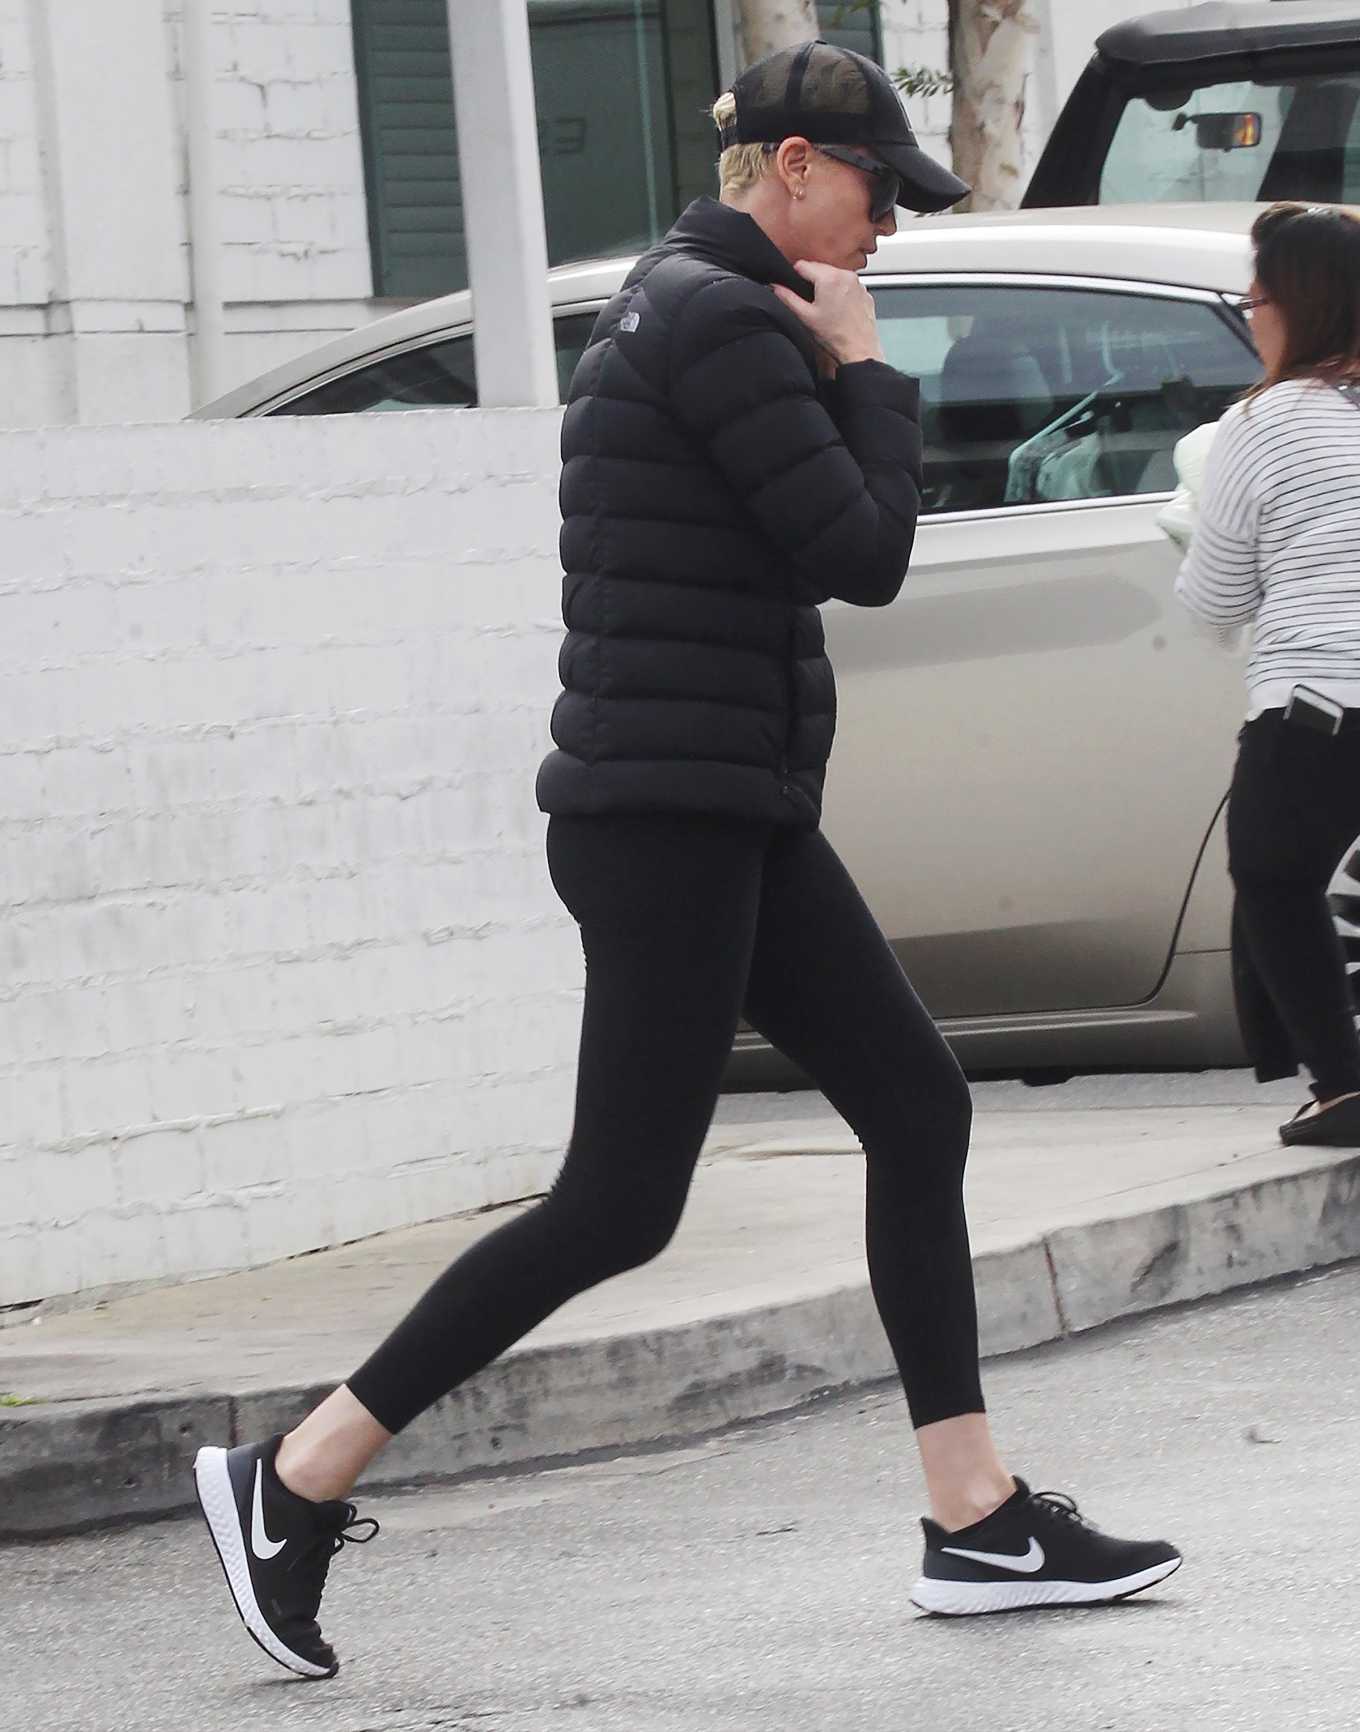 Charlize Theron â€“ Spopping canddis in Beverly Hills